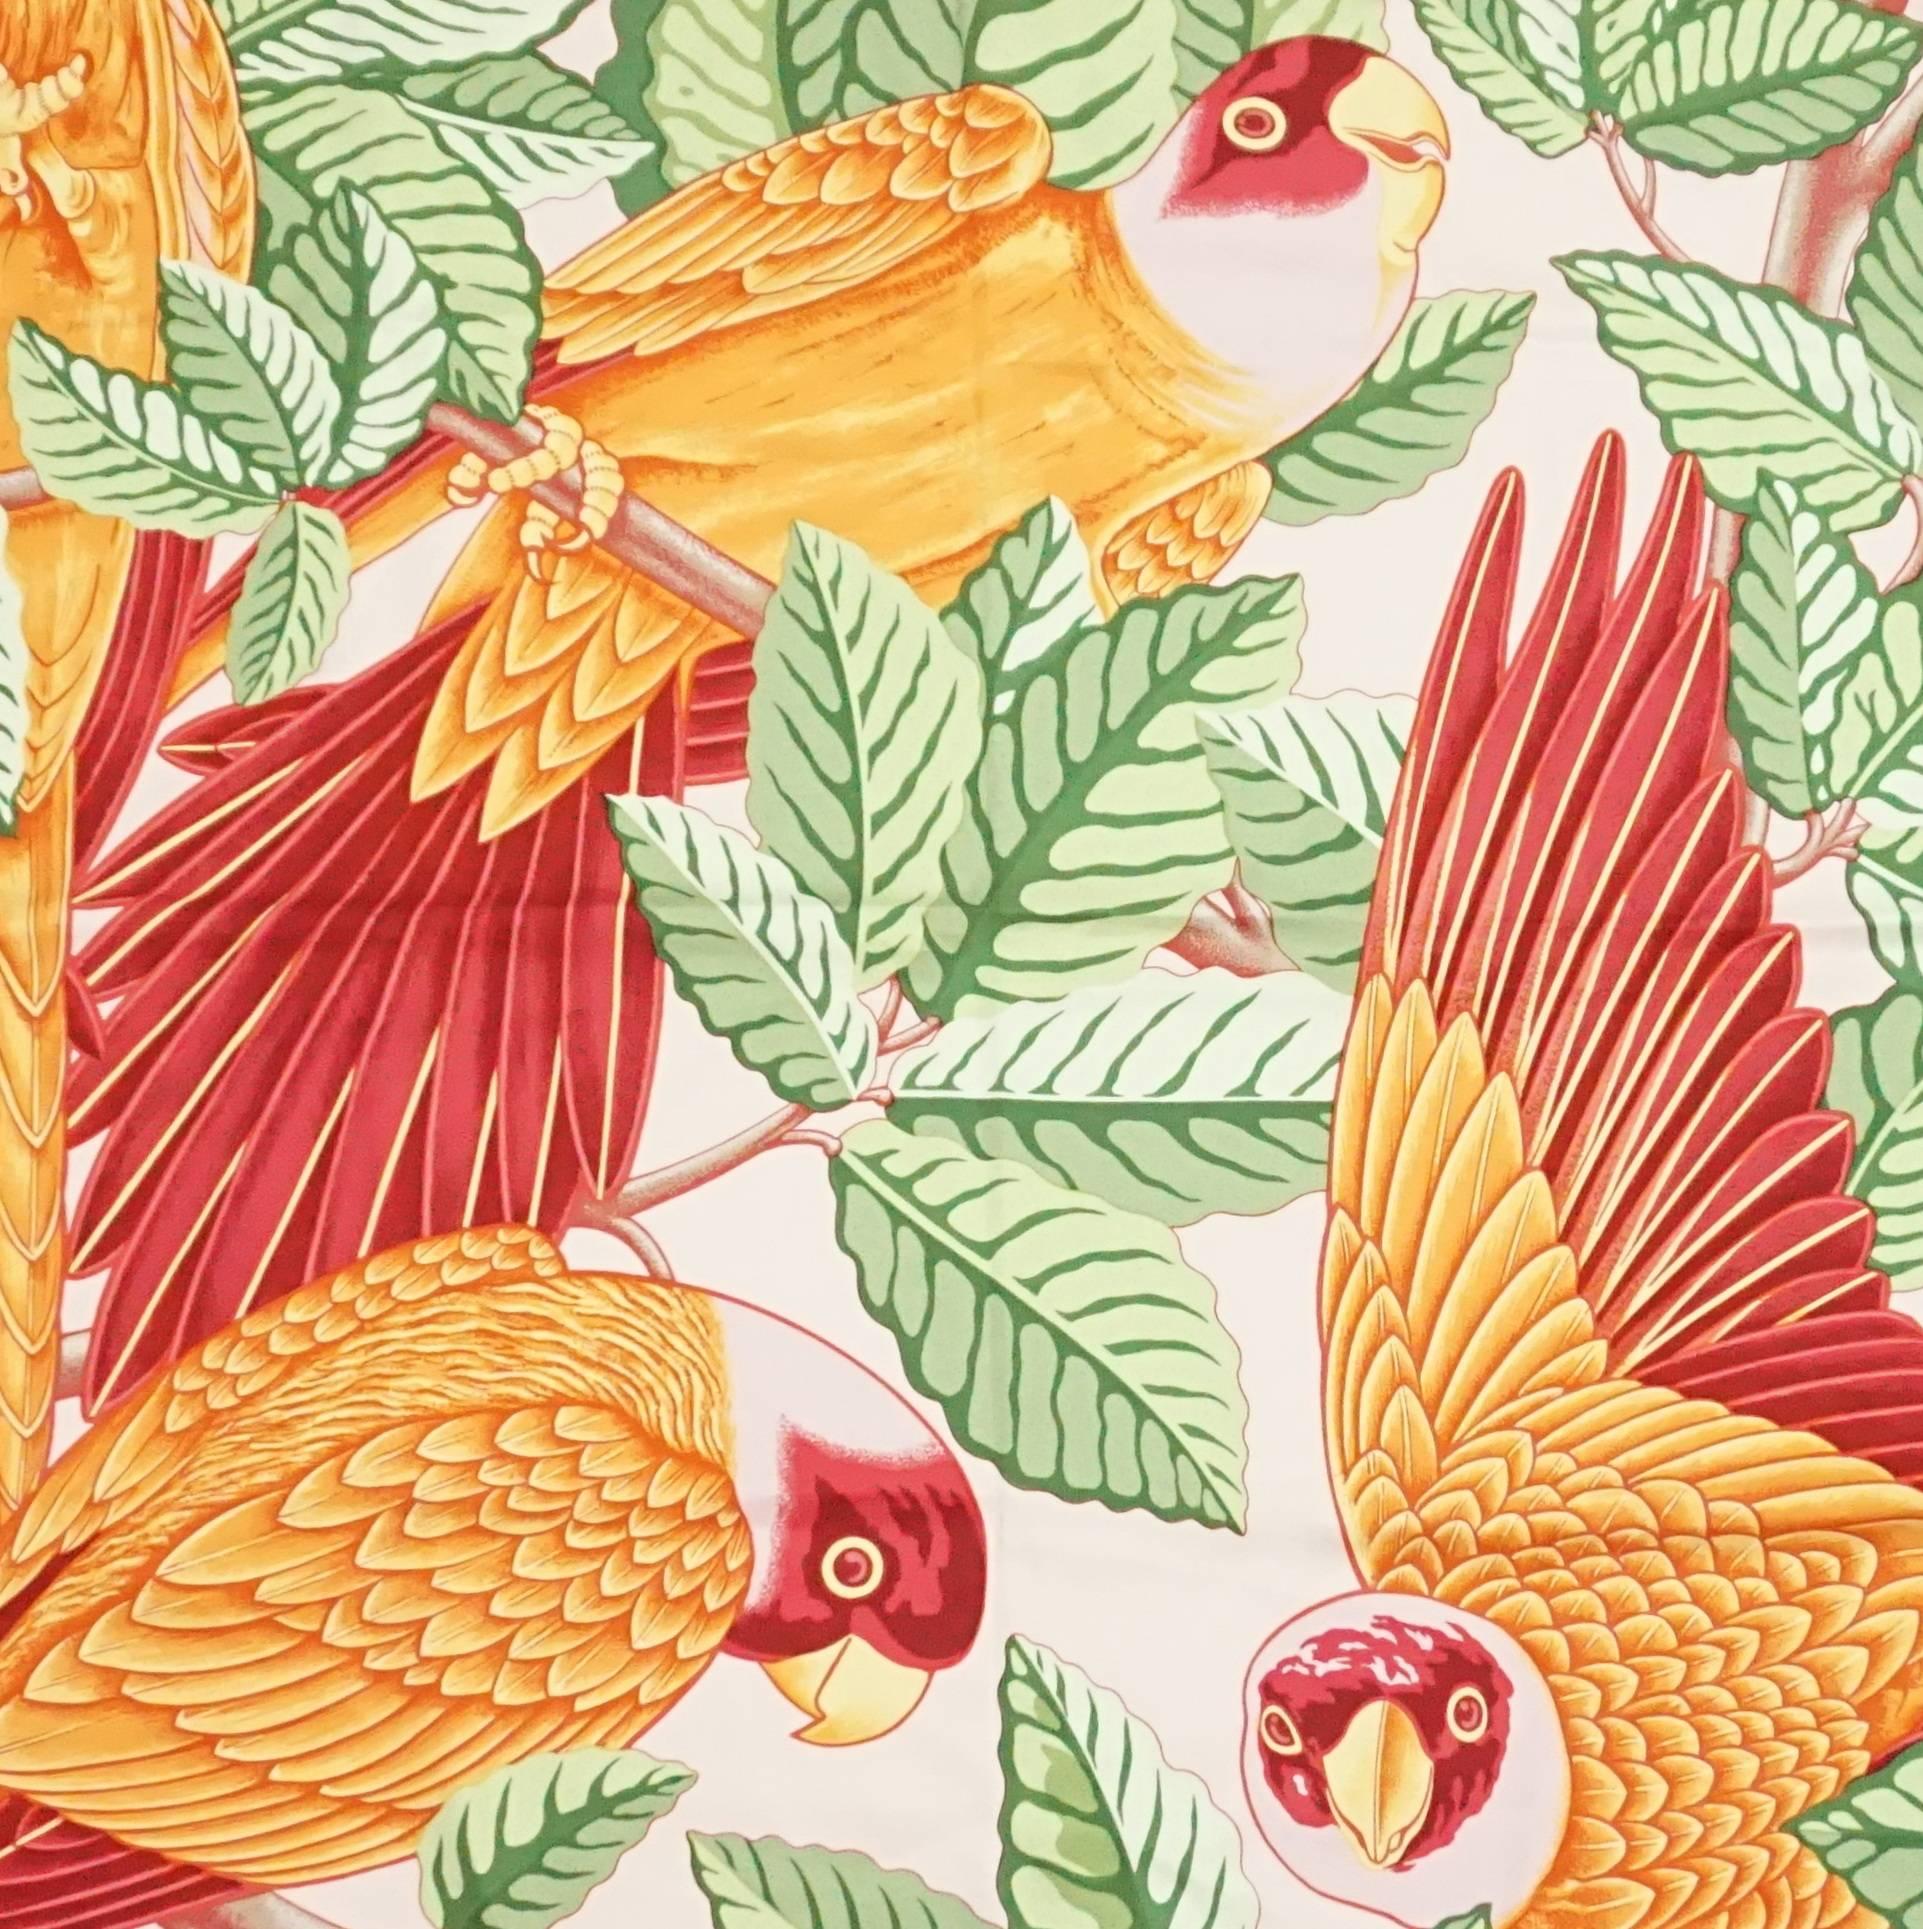 This Hermes scarf has a vibrant pink trim and a parrot design. The design has green leaves and orange and red parrots. This scarf is in excellent condition.

Measurements
Length: 35"
Width: 35.5"